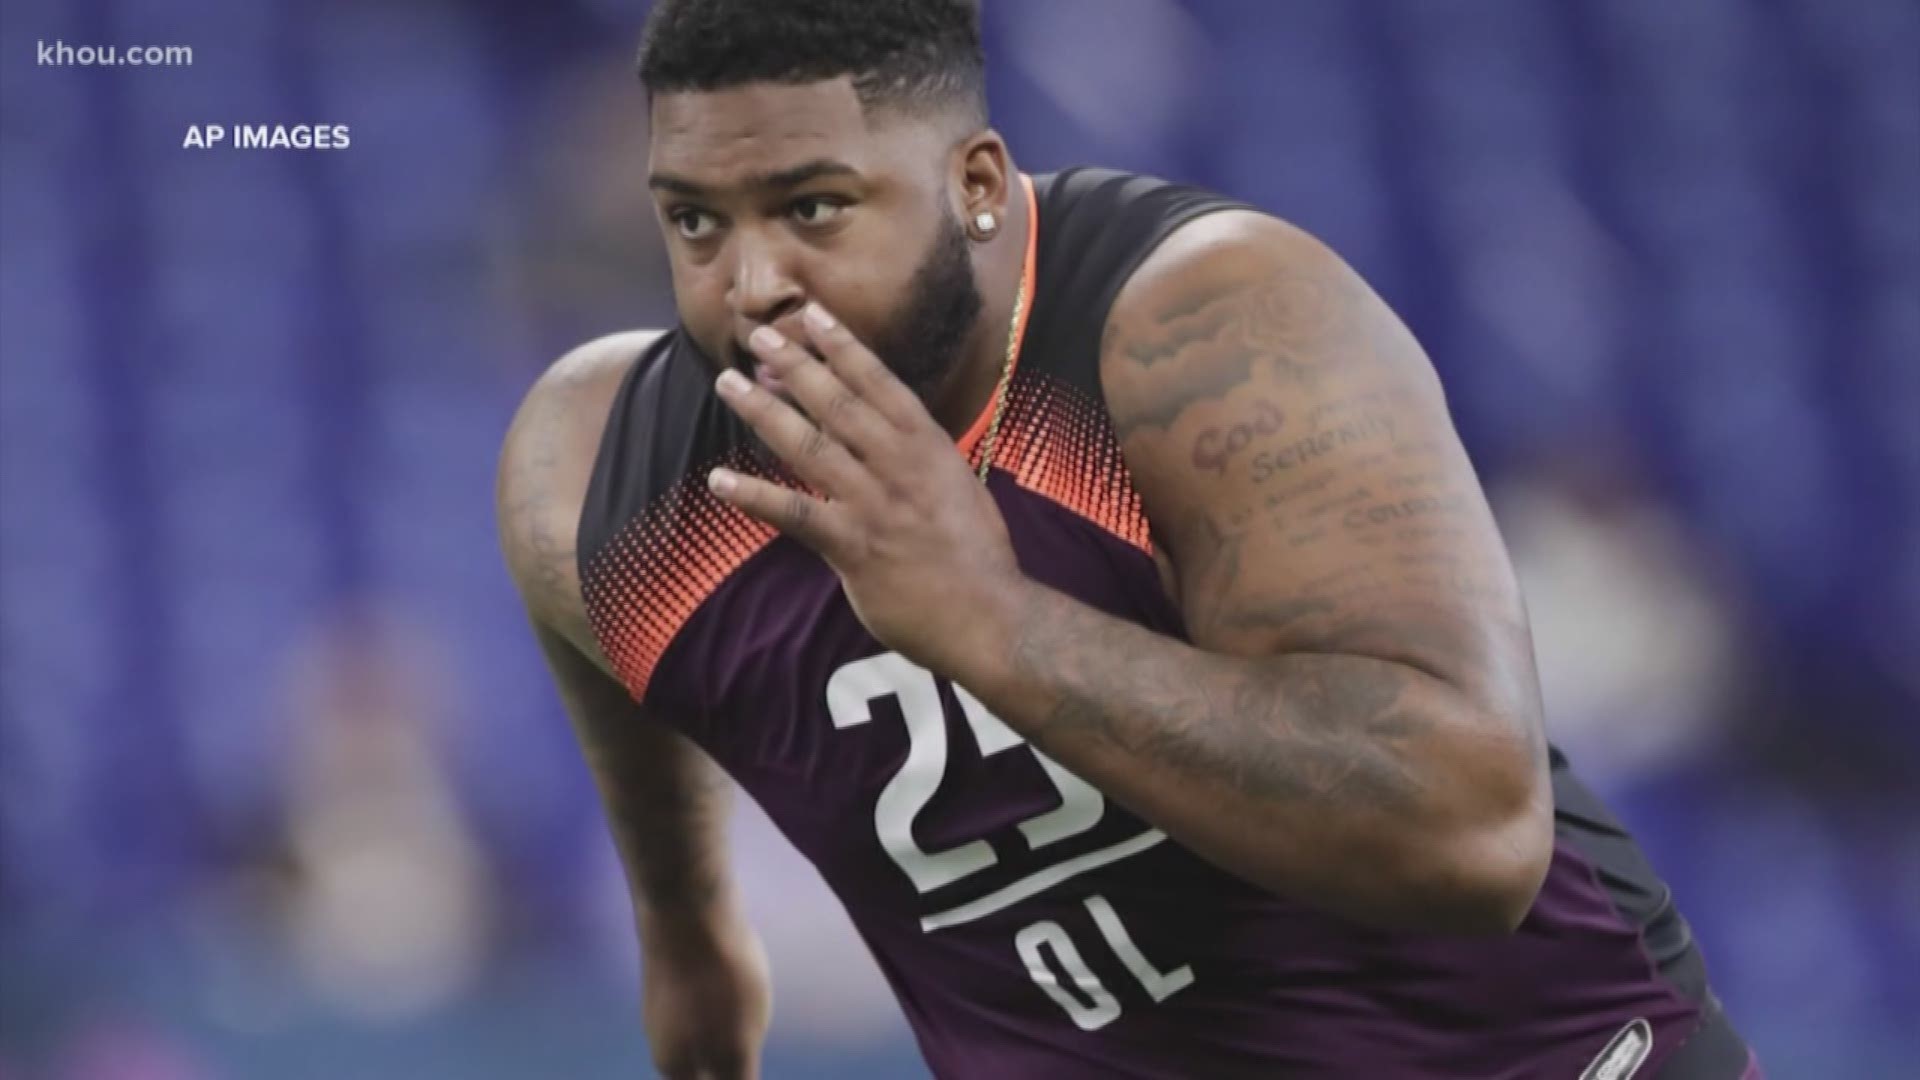 The Houston Texans chose offensive tackle Tytus Howard of Alabama State with the 23rd overall pick in the NFL draft Thursday night, hoping he can help protect banged-up quarterback Deshaun Watson.